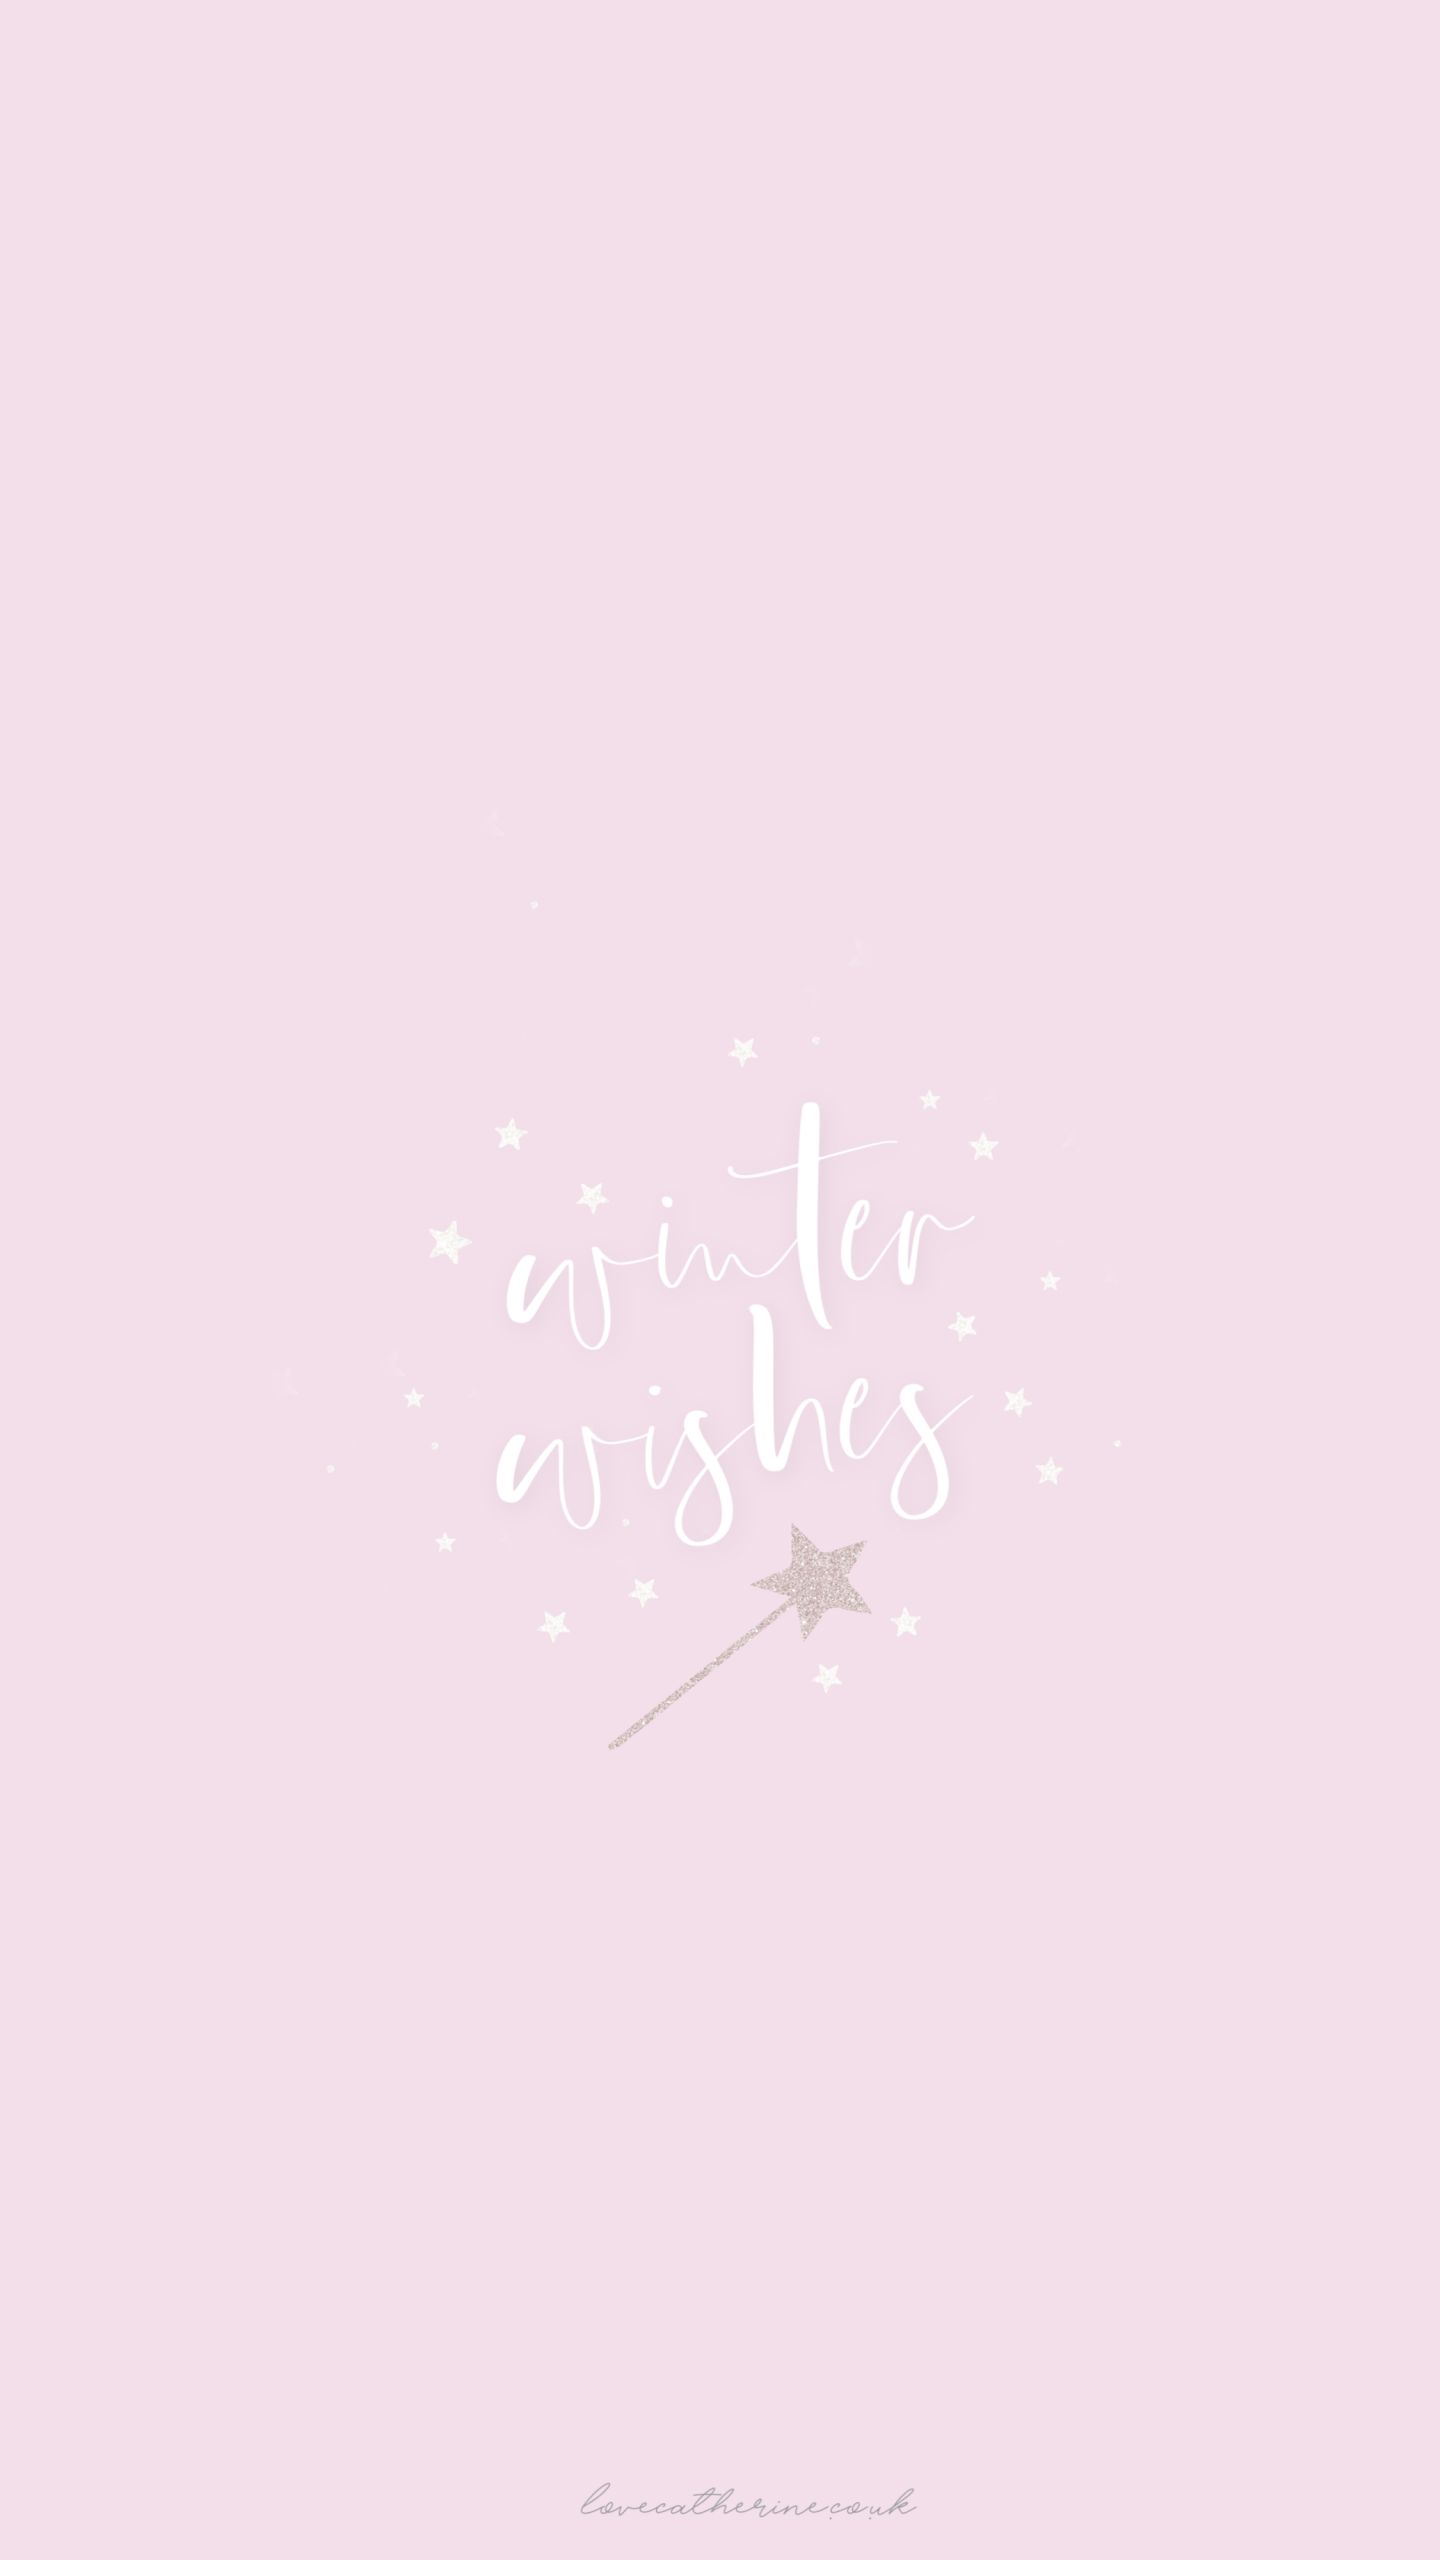 Free Cute & Girly Winter Phone Wallpaper For Christmas. Christmas phone wallpaper, Wallpaper iphone christmas, iPhone wallpaper girly